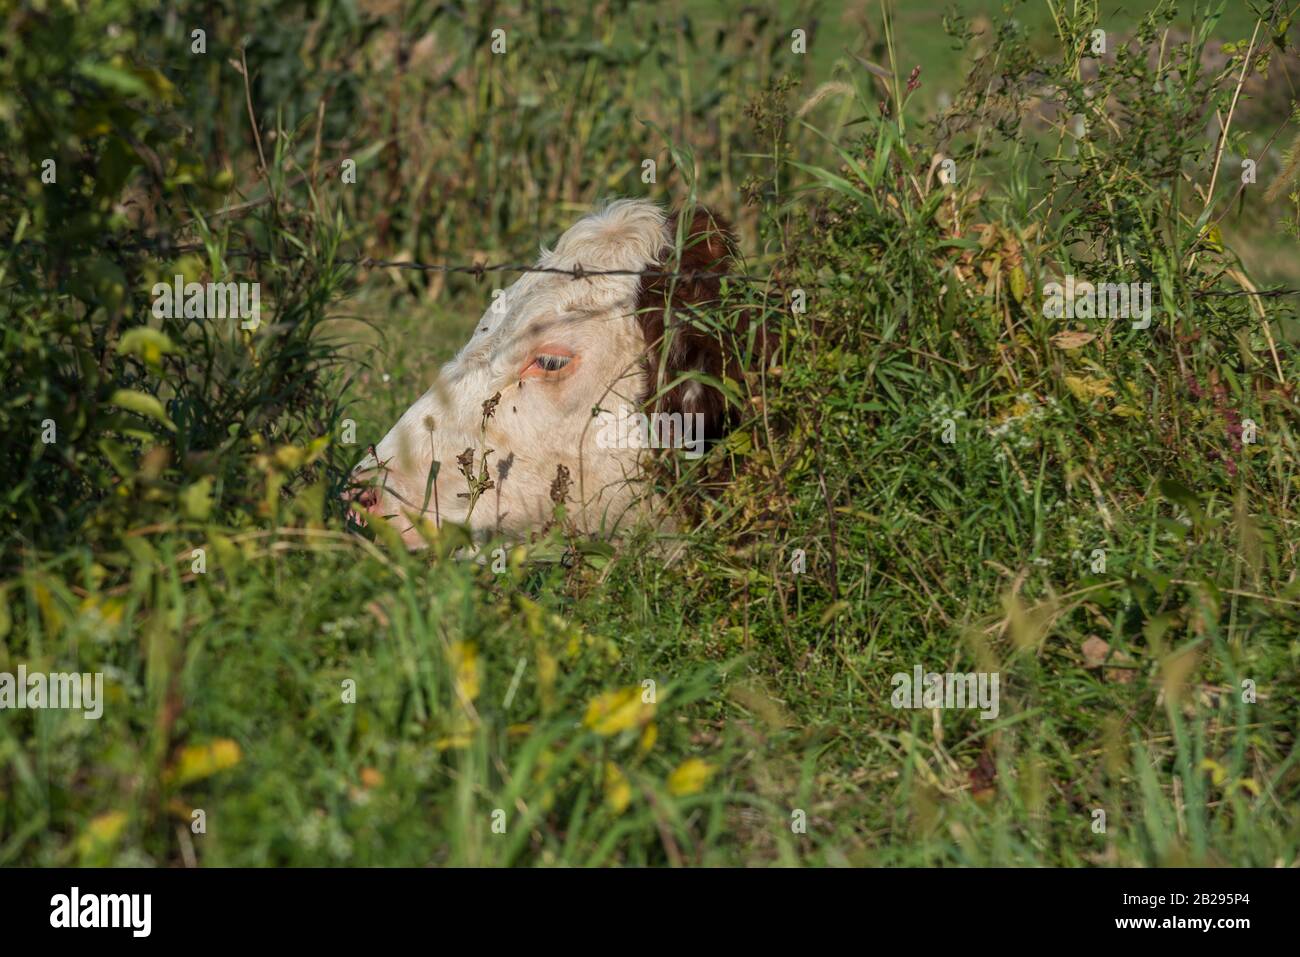 Hereford cow sitting in summer undergrowth with just its face visible Stock Photo